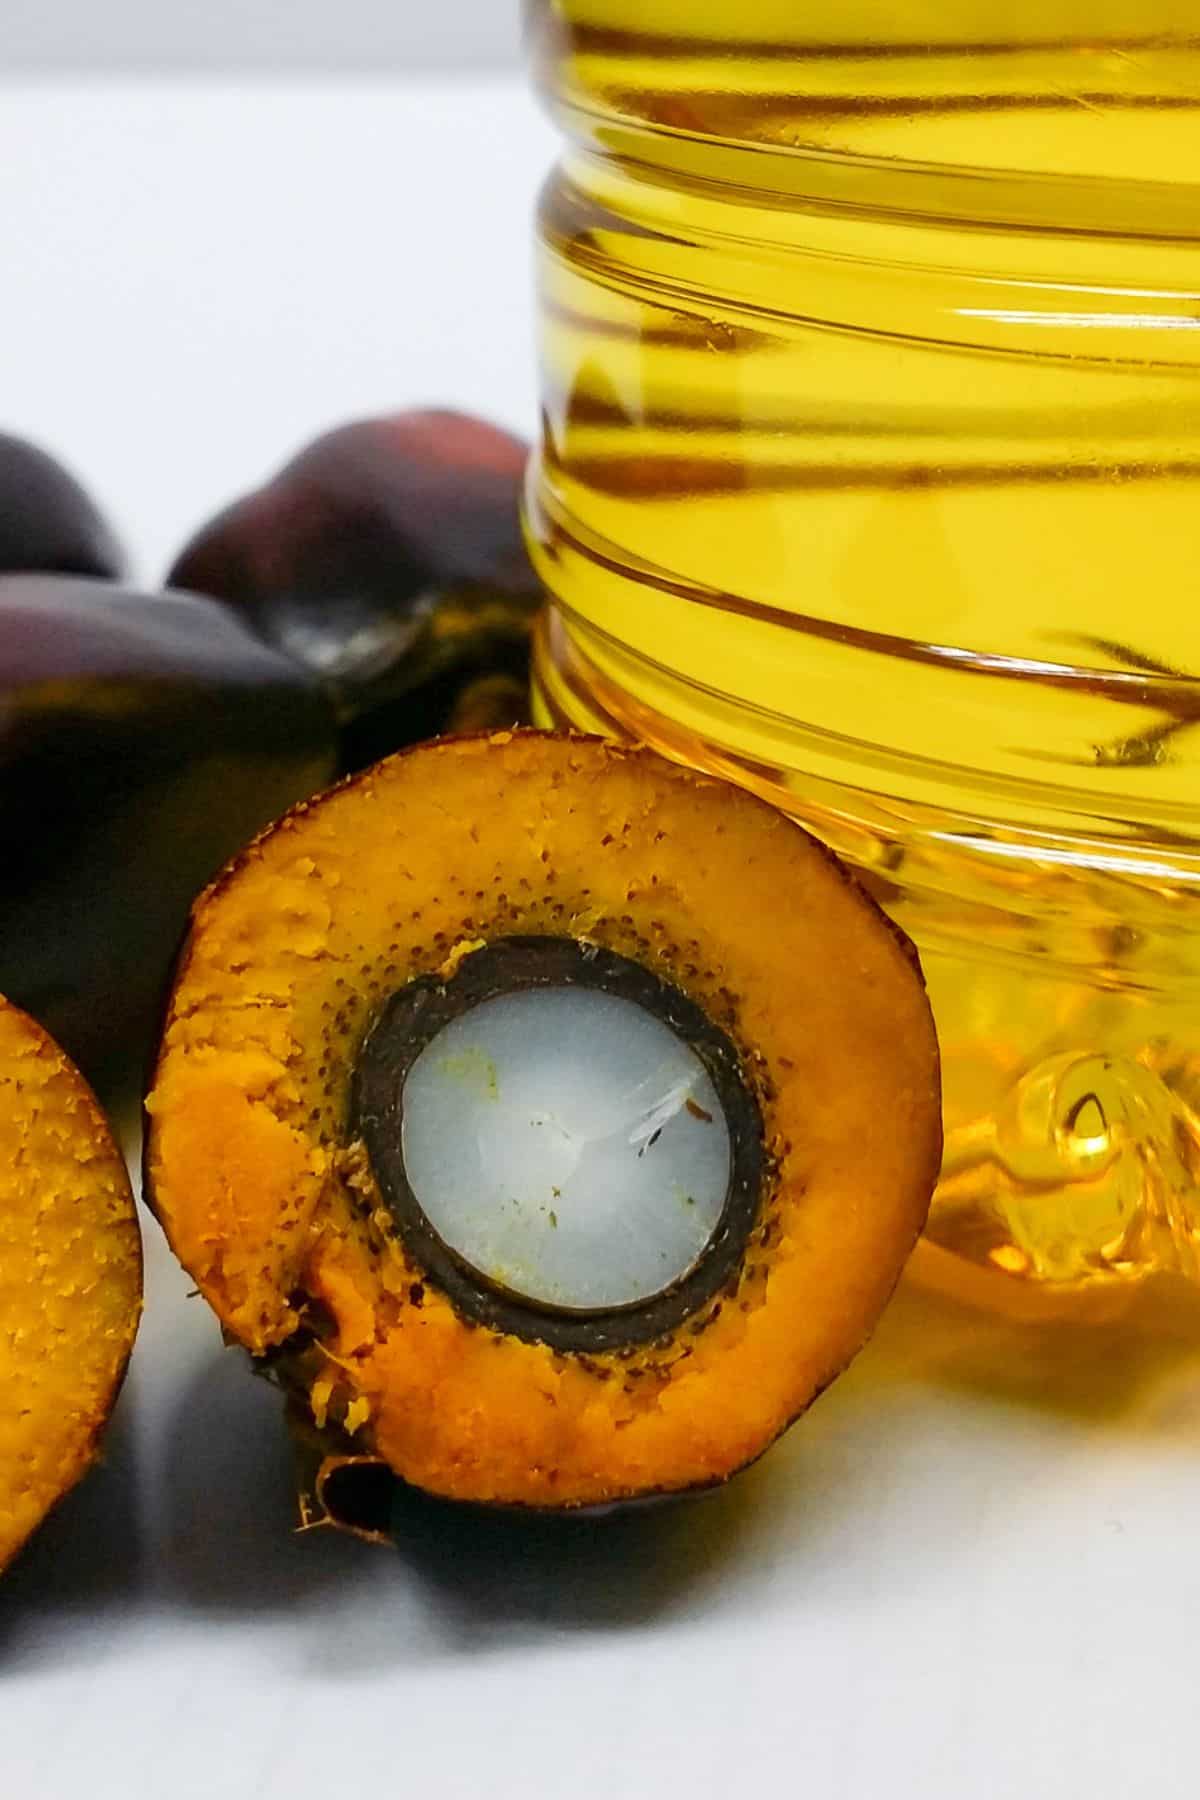 a palm fruit cut in half to show the kernel next to a jar of oil.